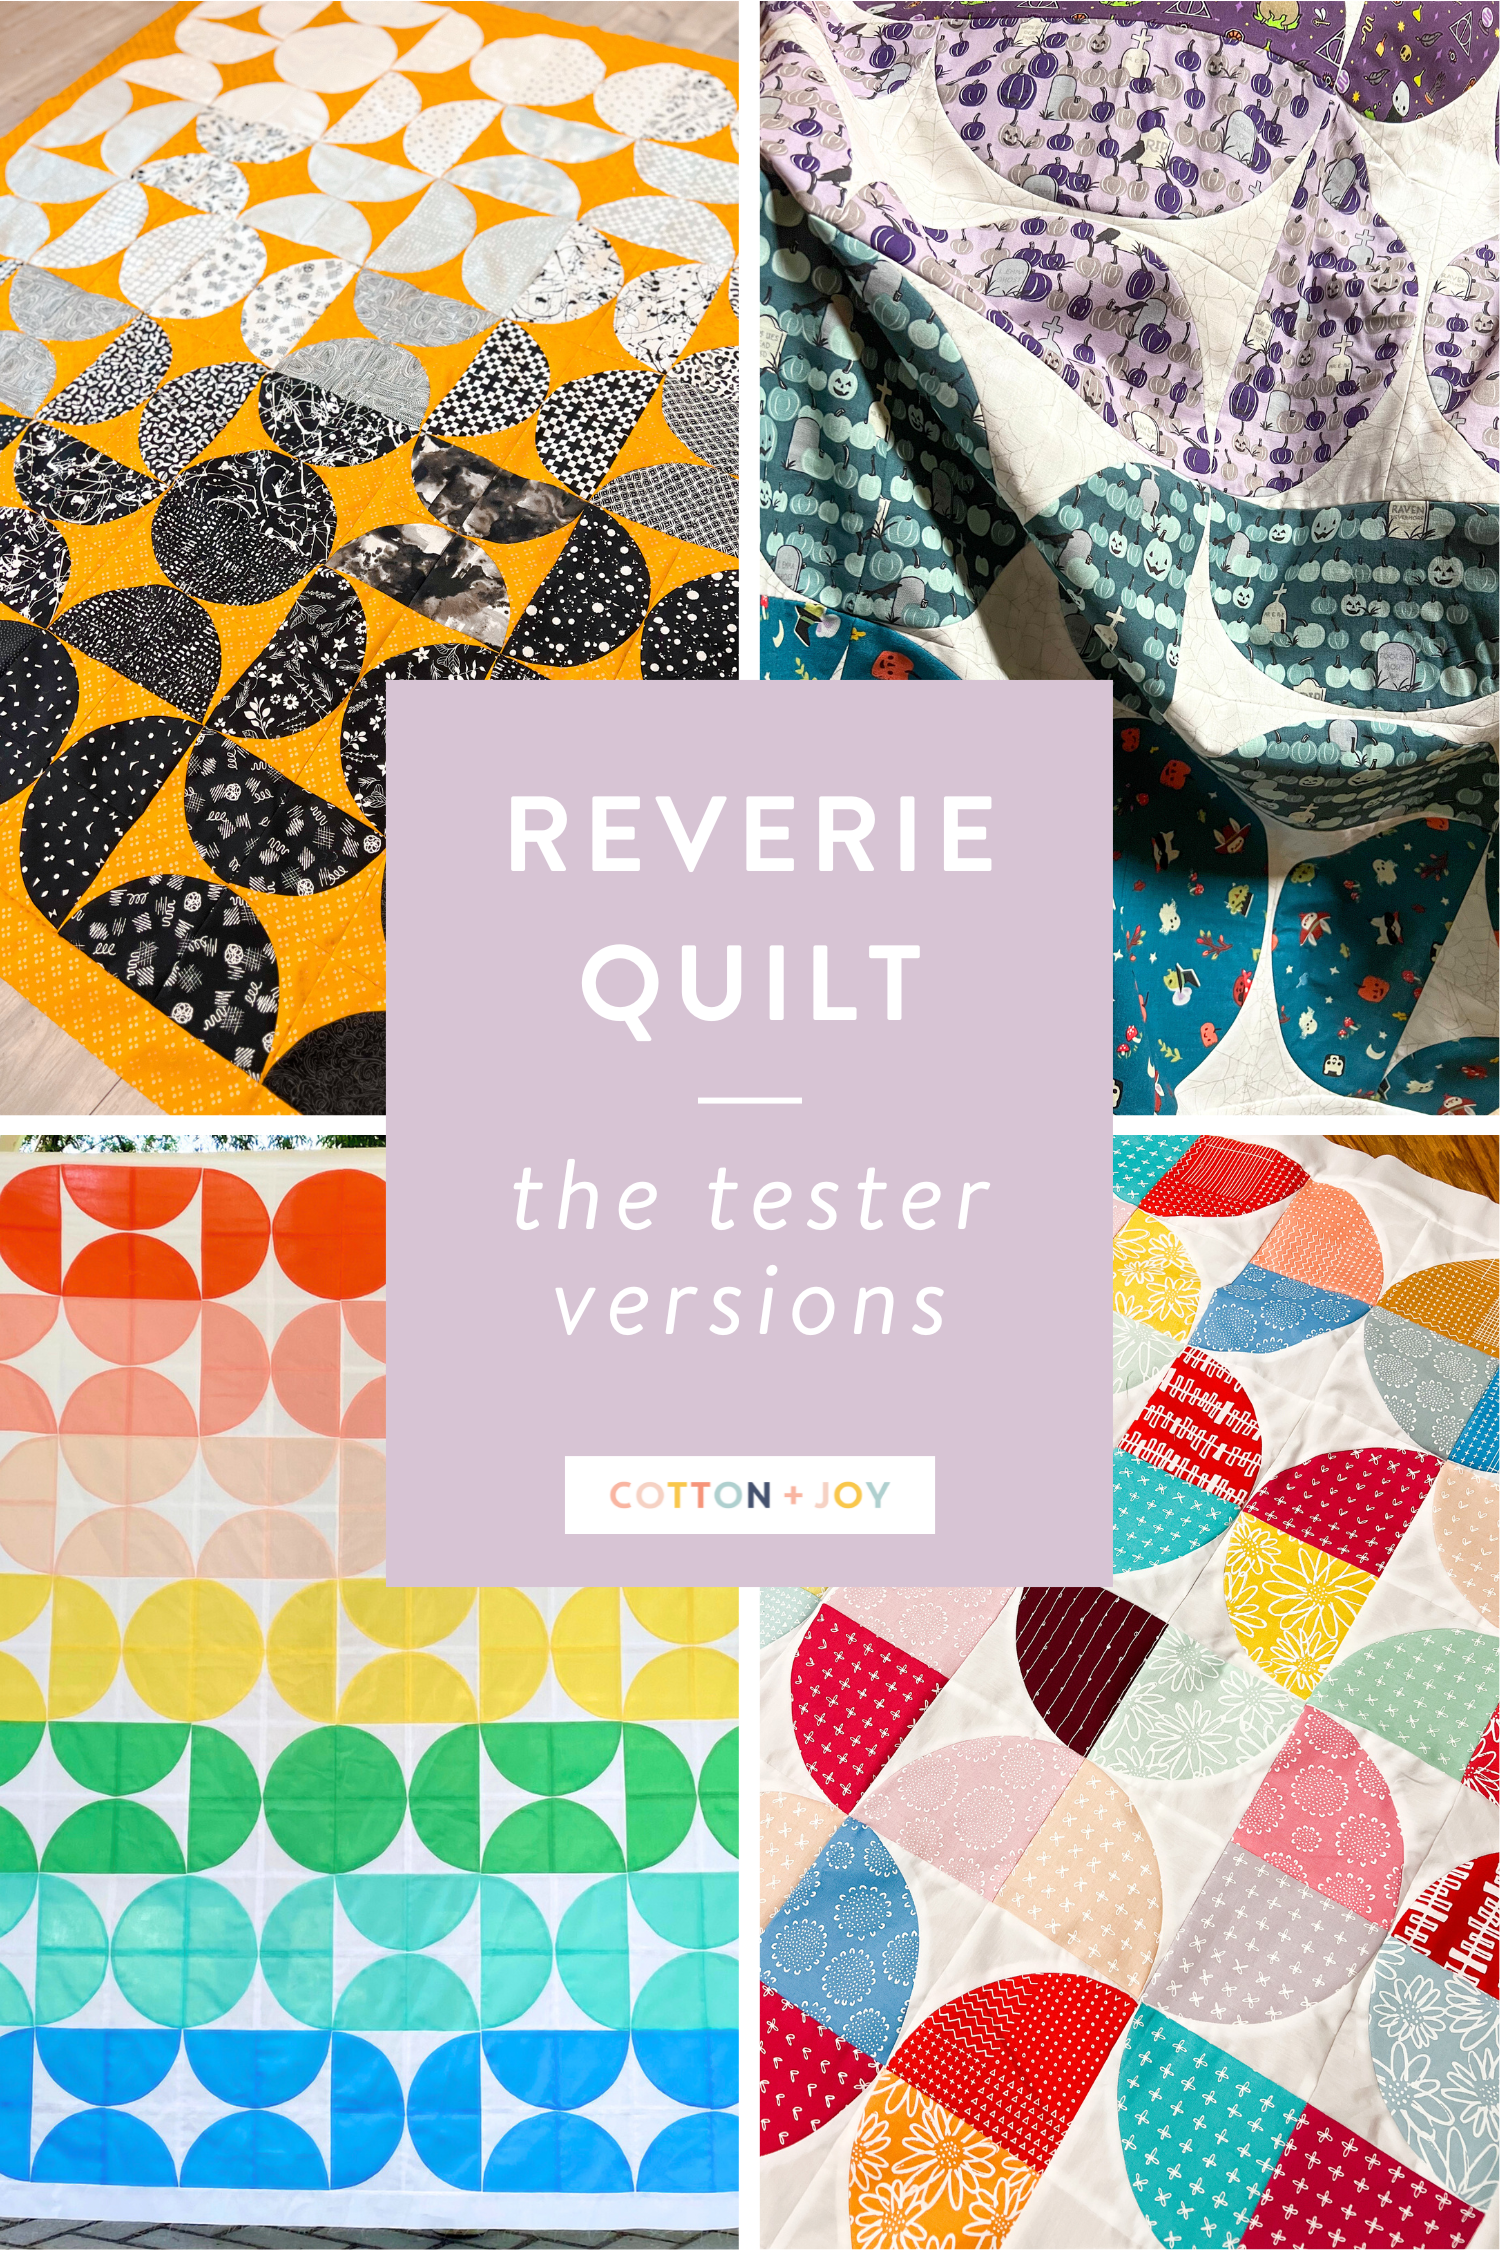 Reverie Quilt made by quilt pattern testers. A modern quilt design with curved piecing perfect for quilters of all levels, even beginners.